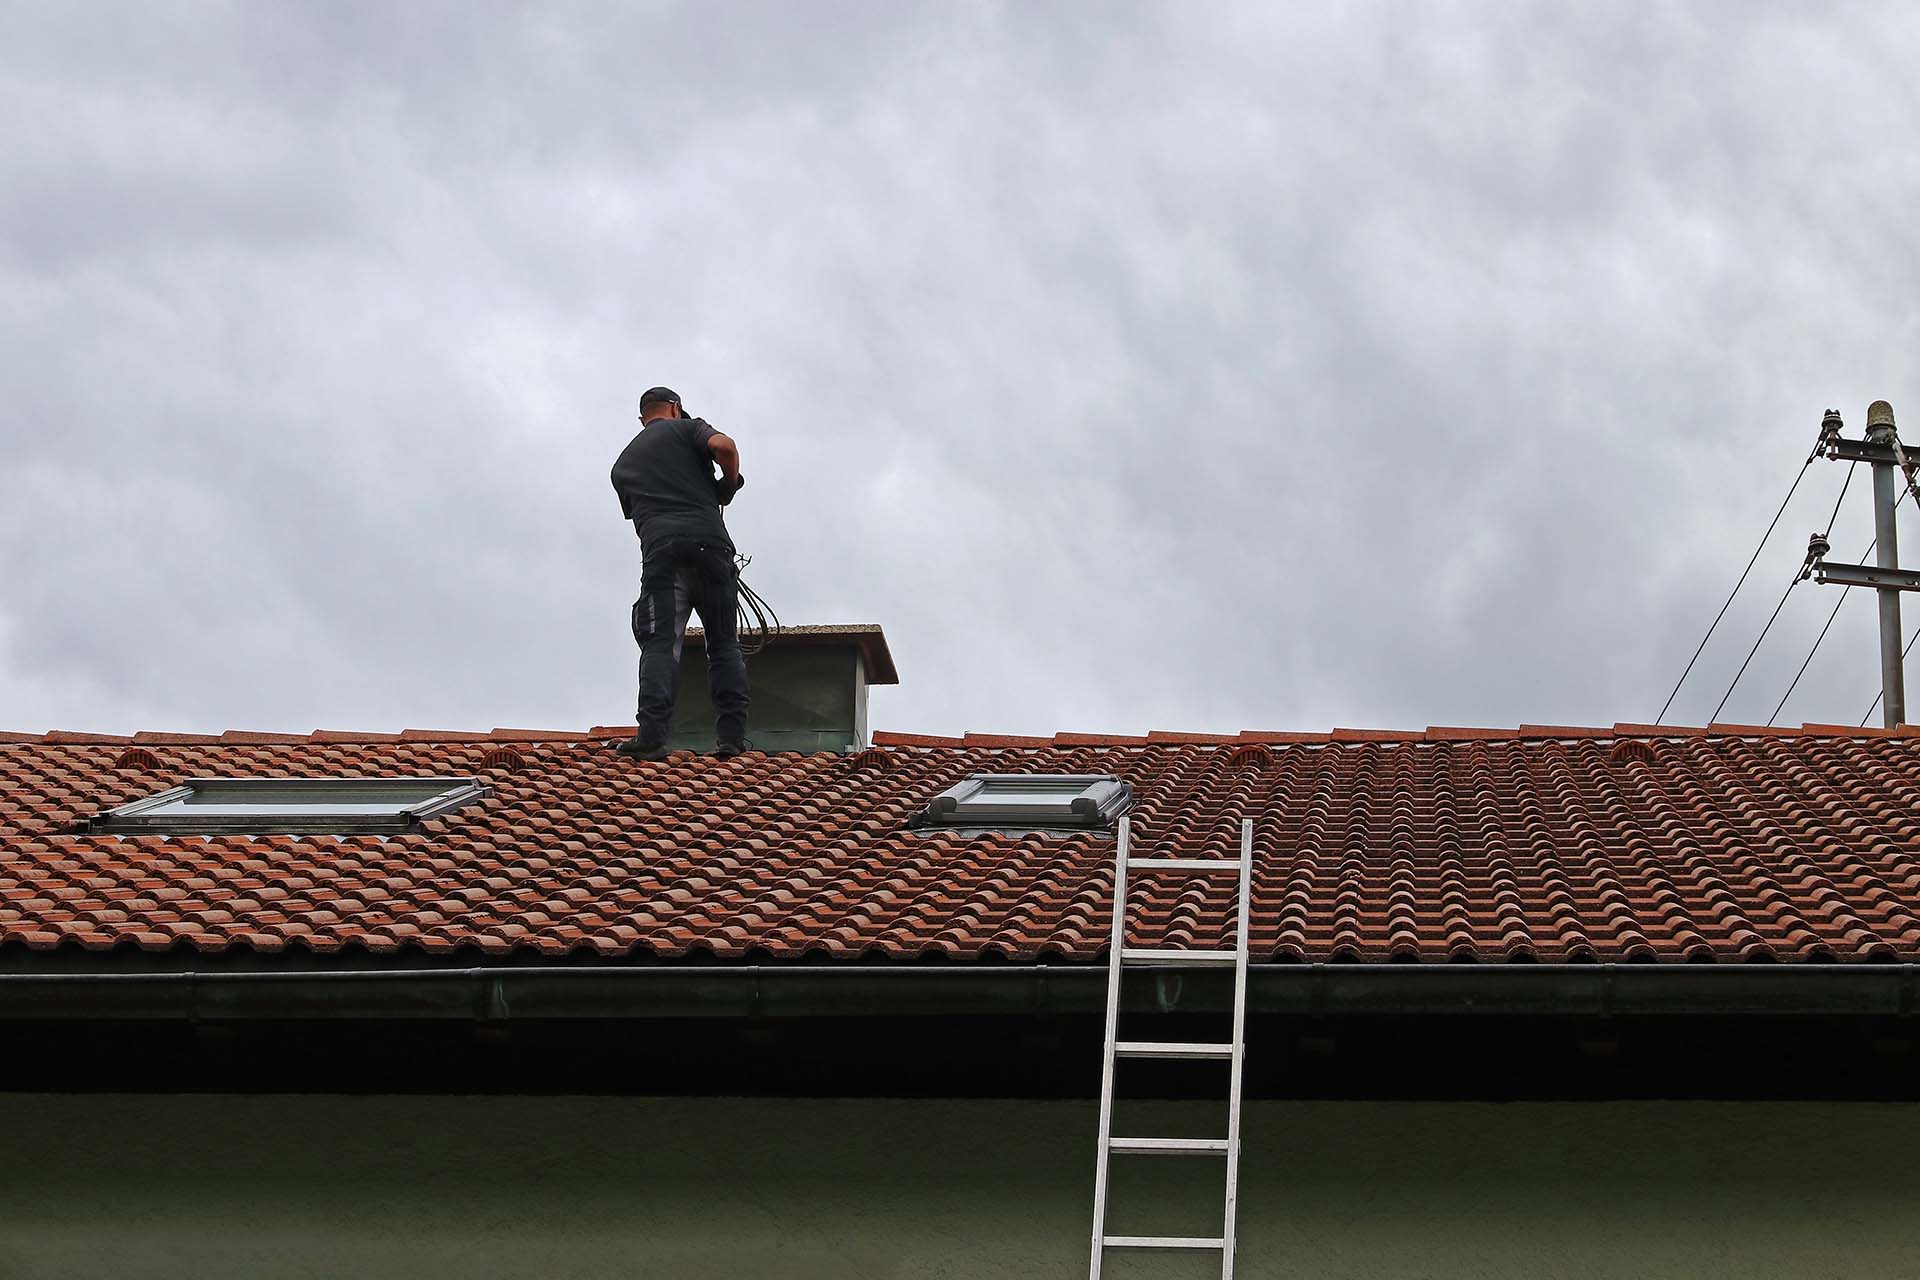 Chimney sweeper standing on roof